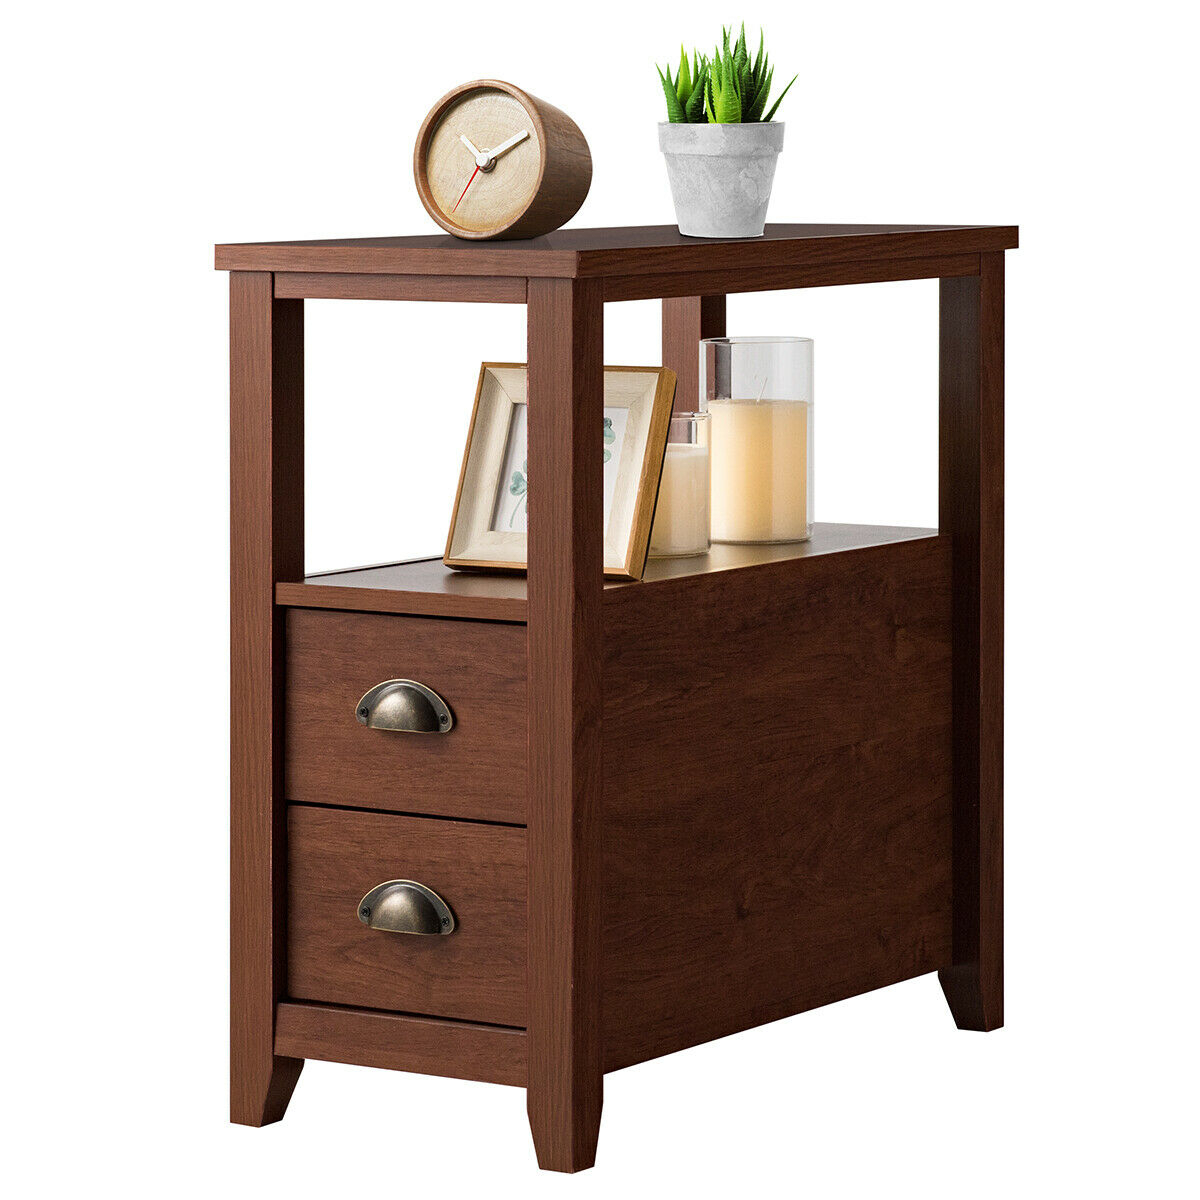 End Table W/ 2 Drawer & Shelf Nightstand Rustic Style Brown